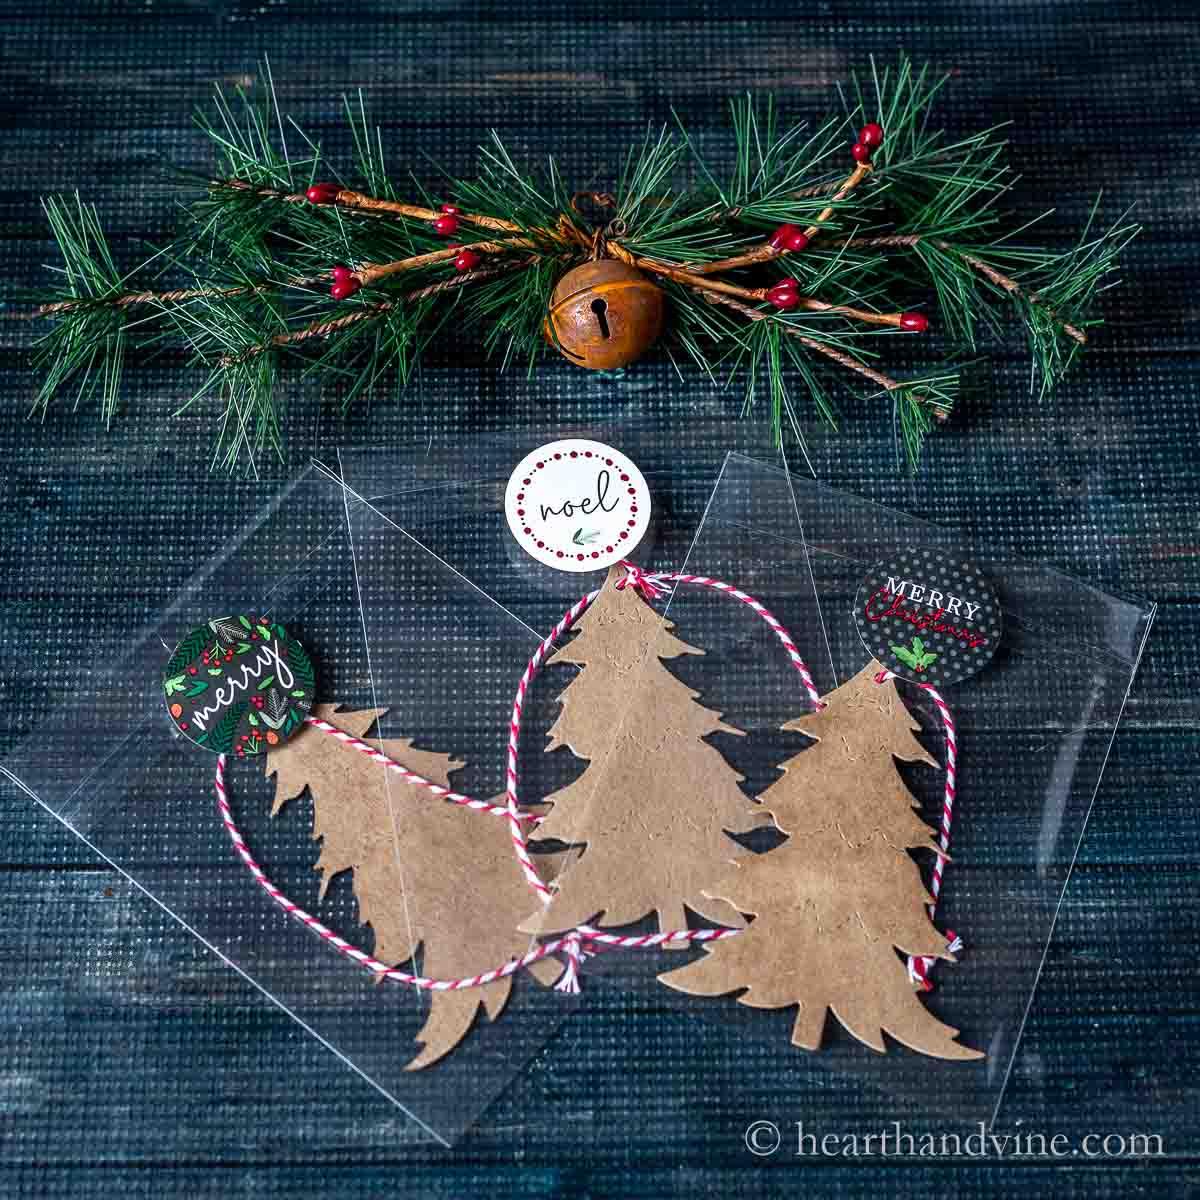 Three bagged chipboard trees with Christmas labels next to a bell with pine decoration.